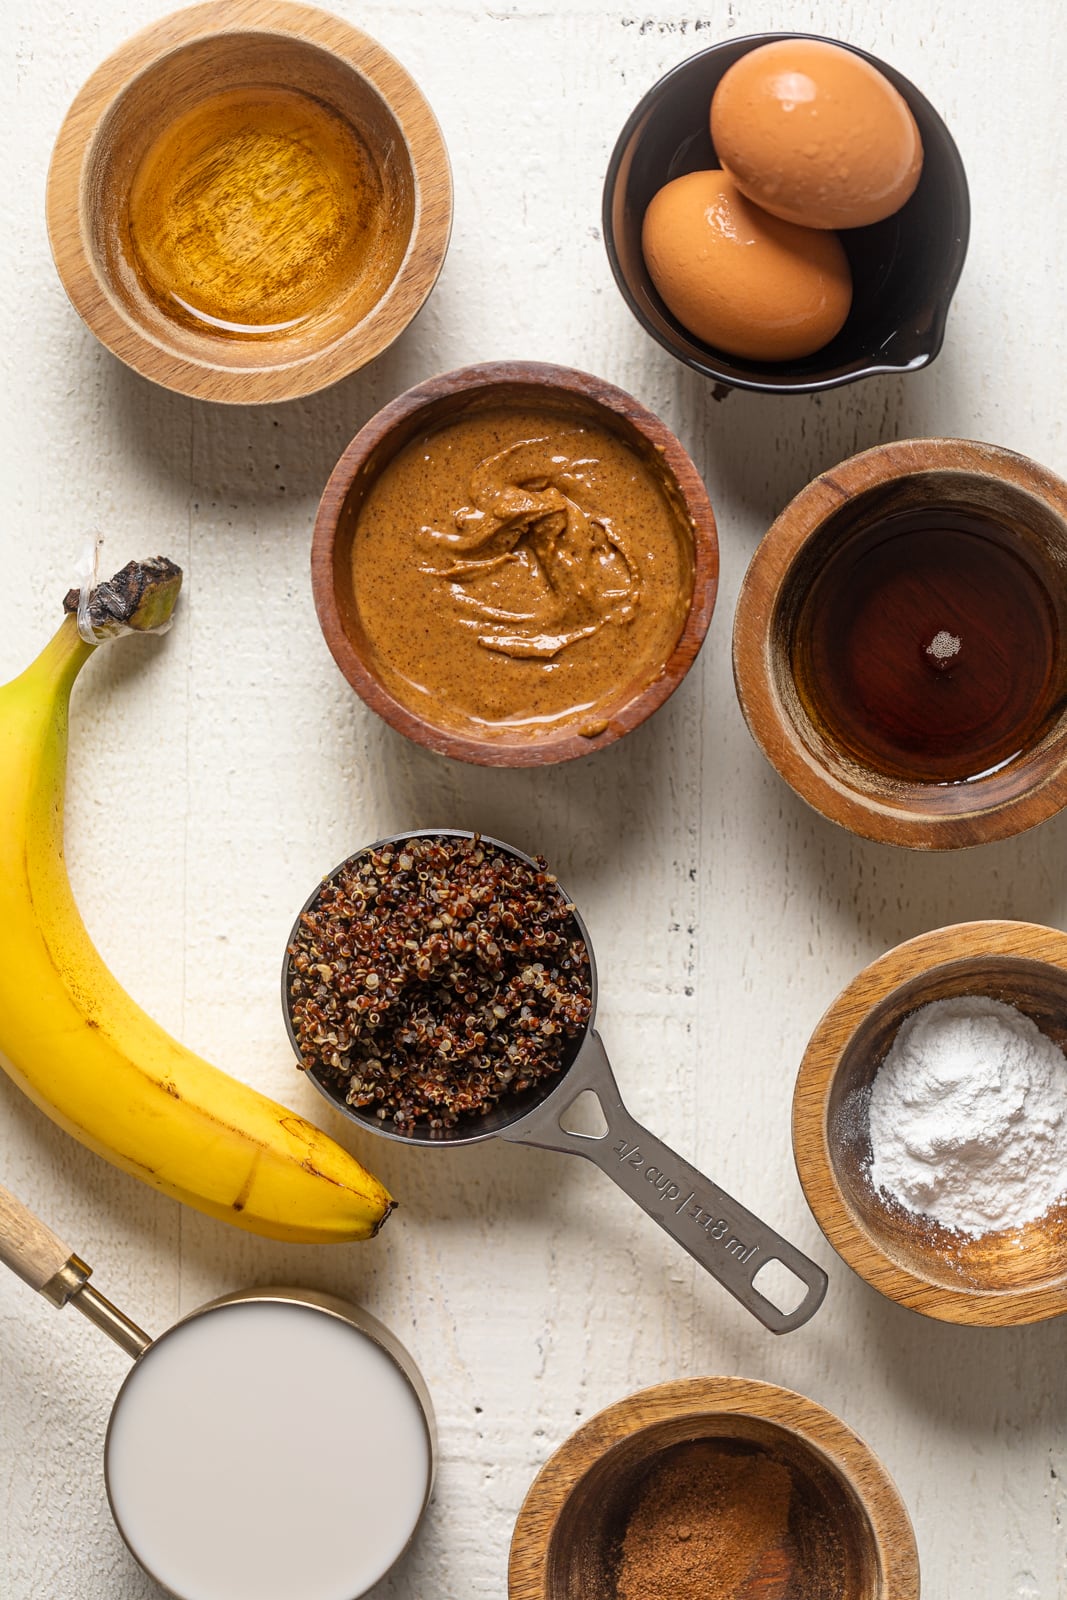 Ingredients for Fluffy Protein Pancakes including banana, egg, and almond butter